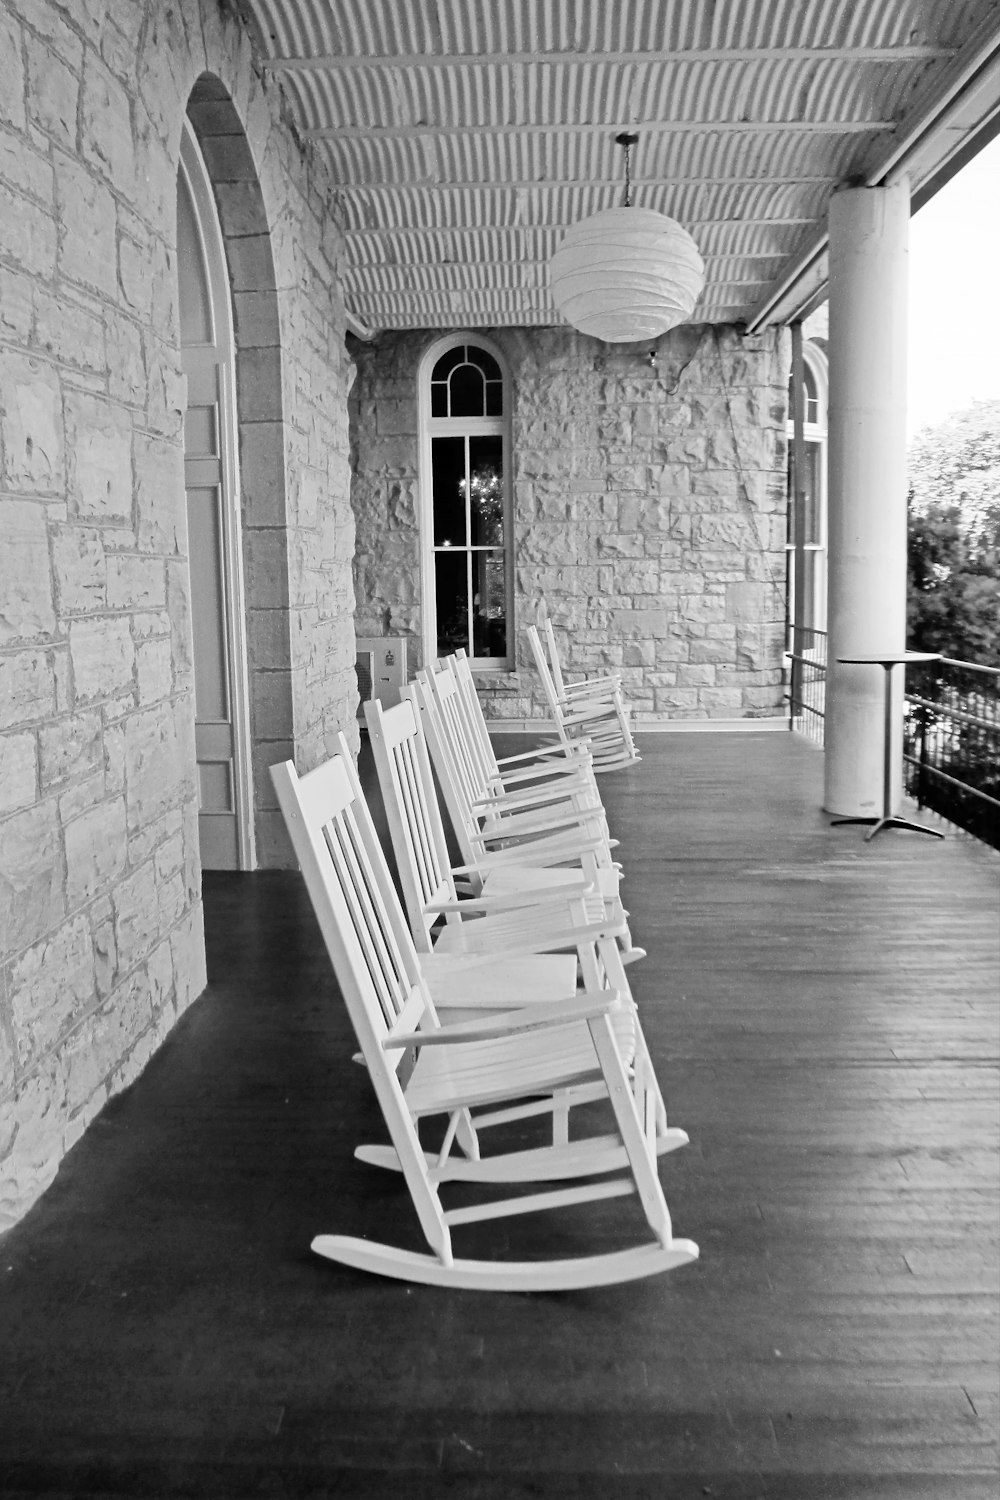 a row of rocking chairs sitting on top of a wooden floor